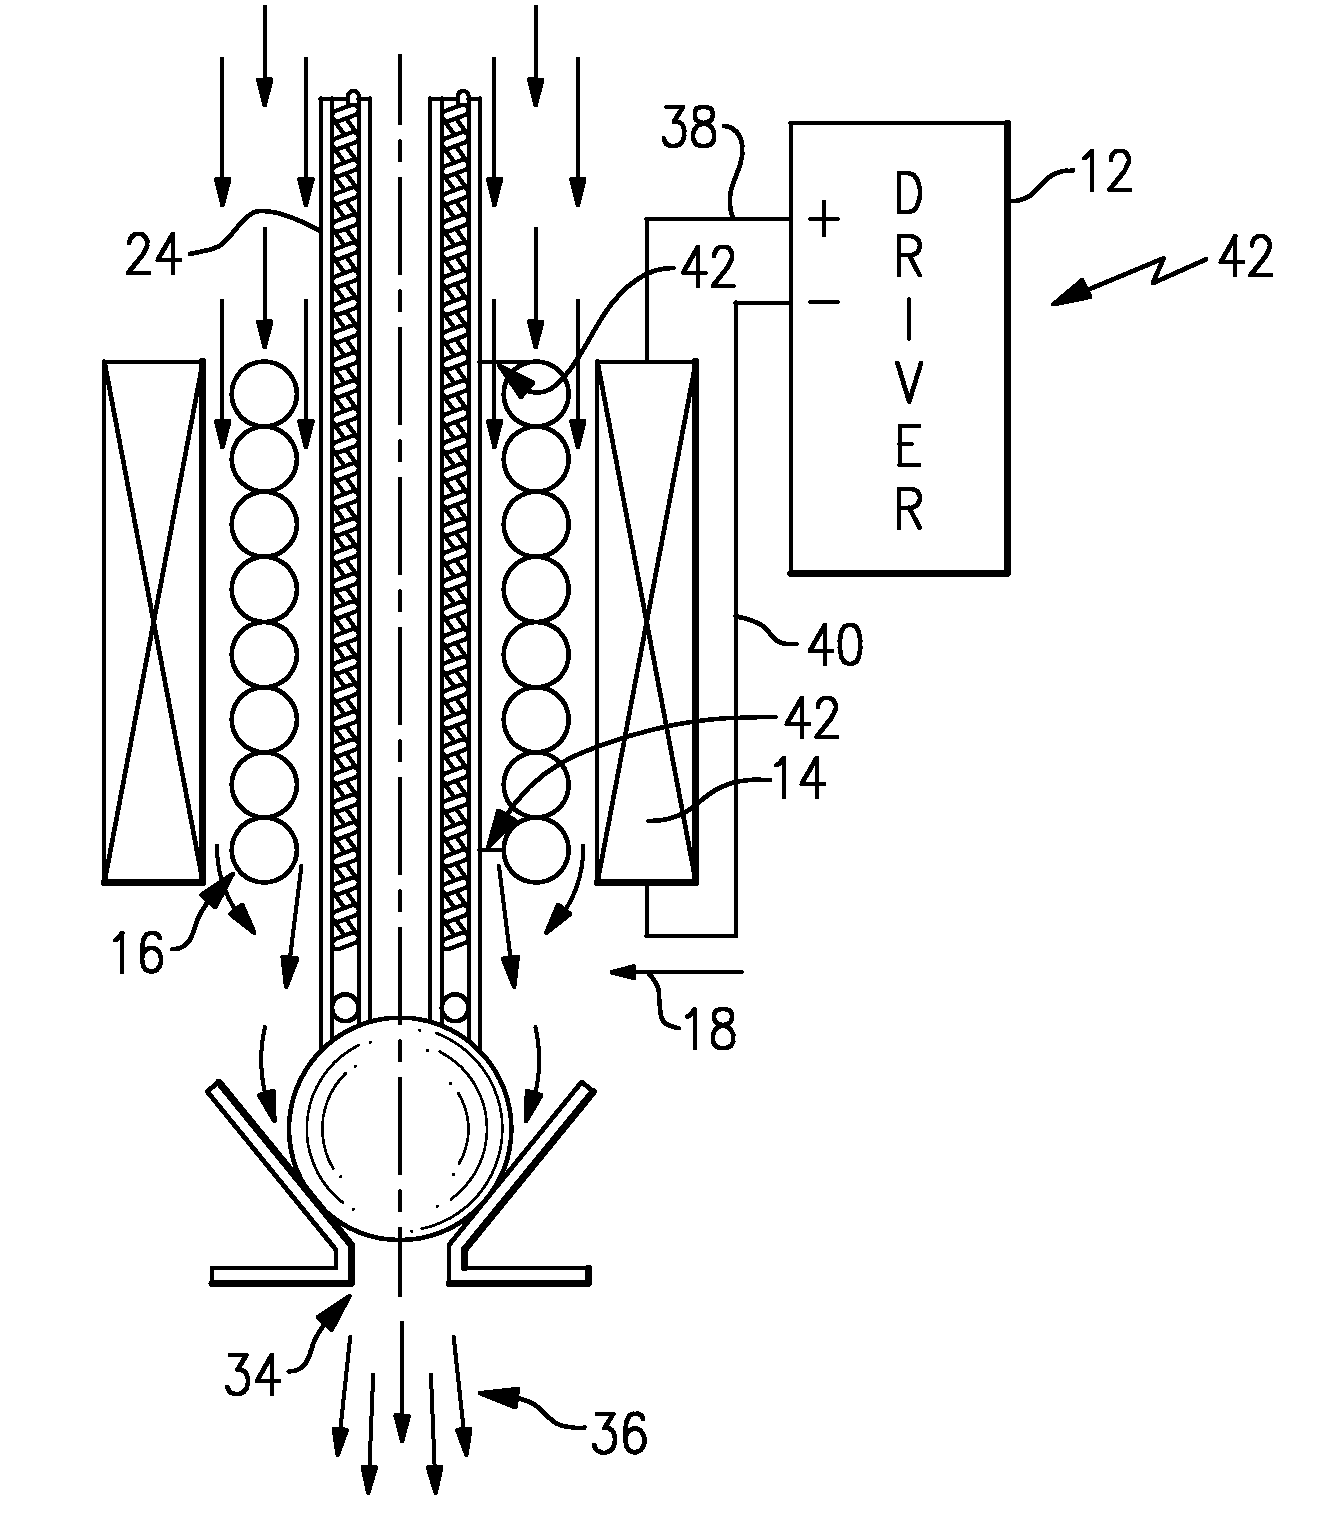 Inductive heated injector using additional coil